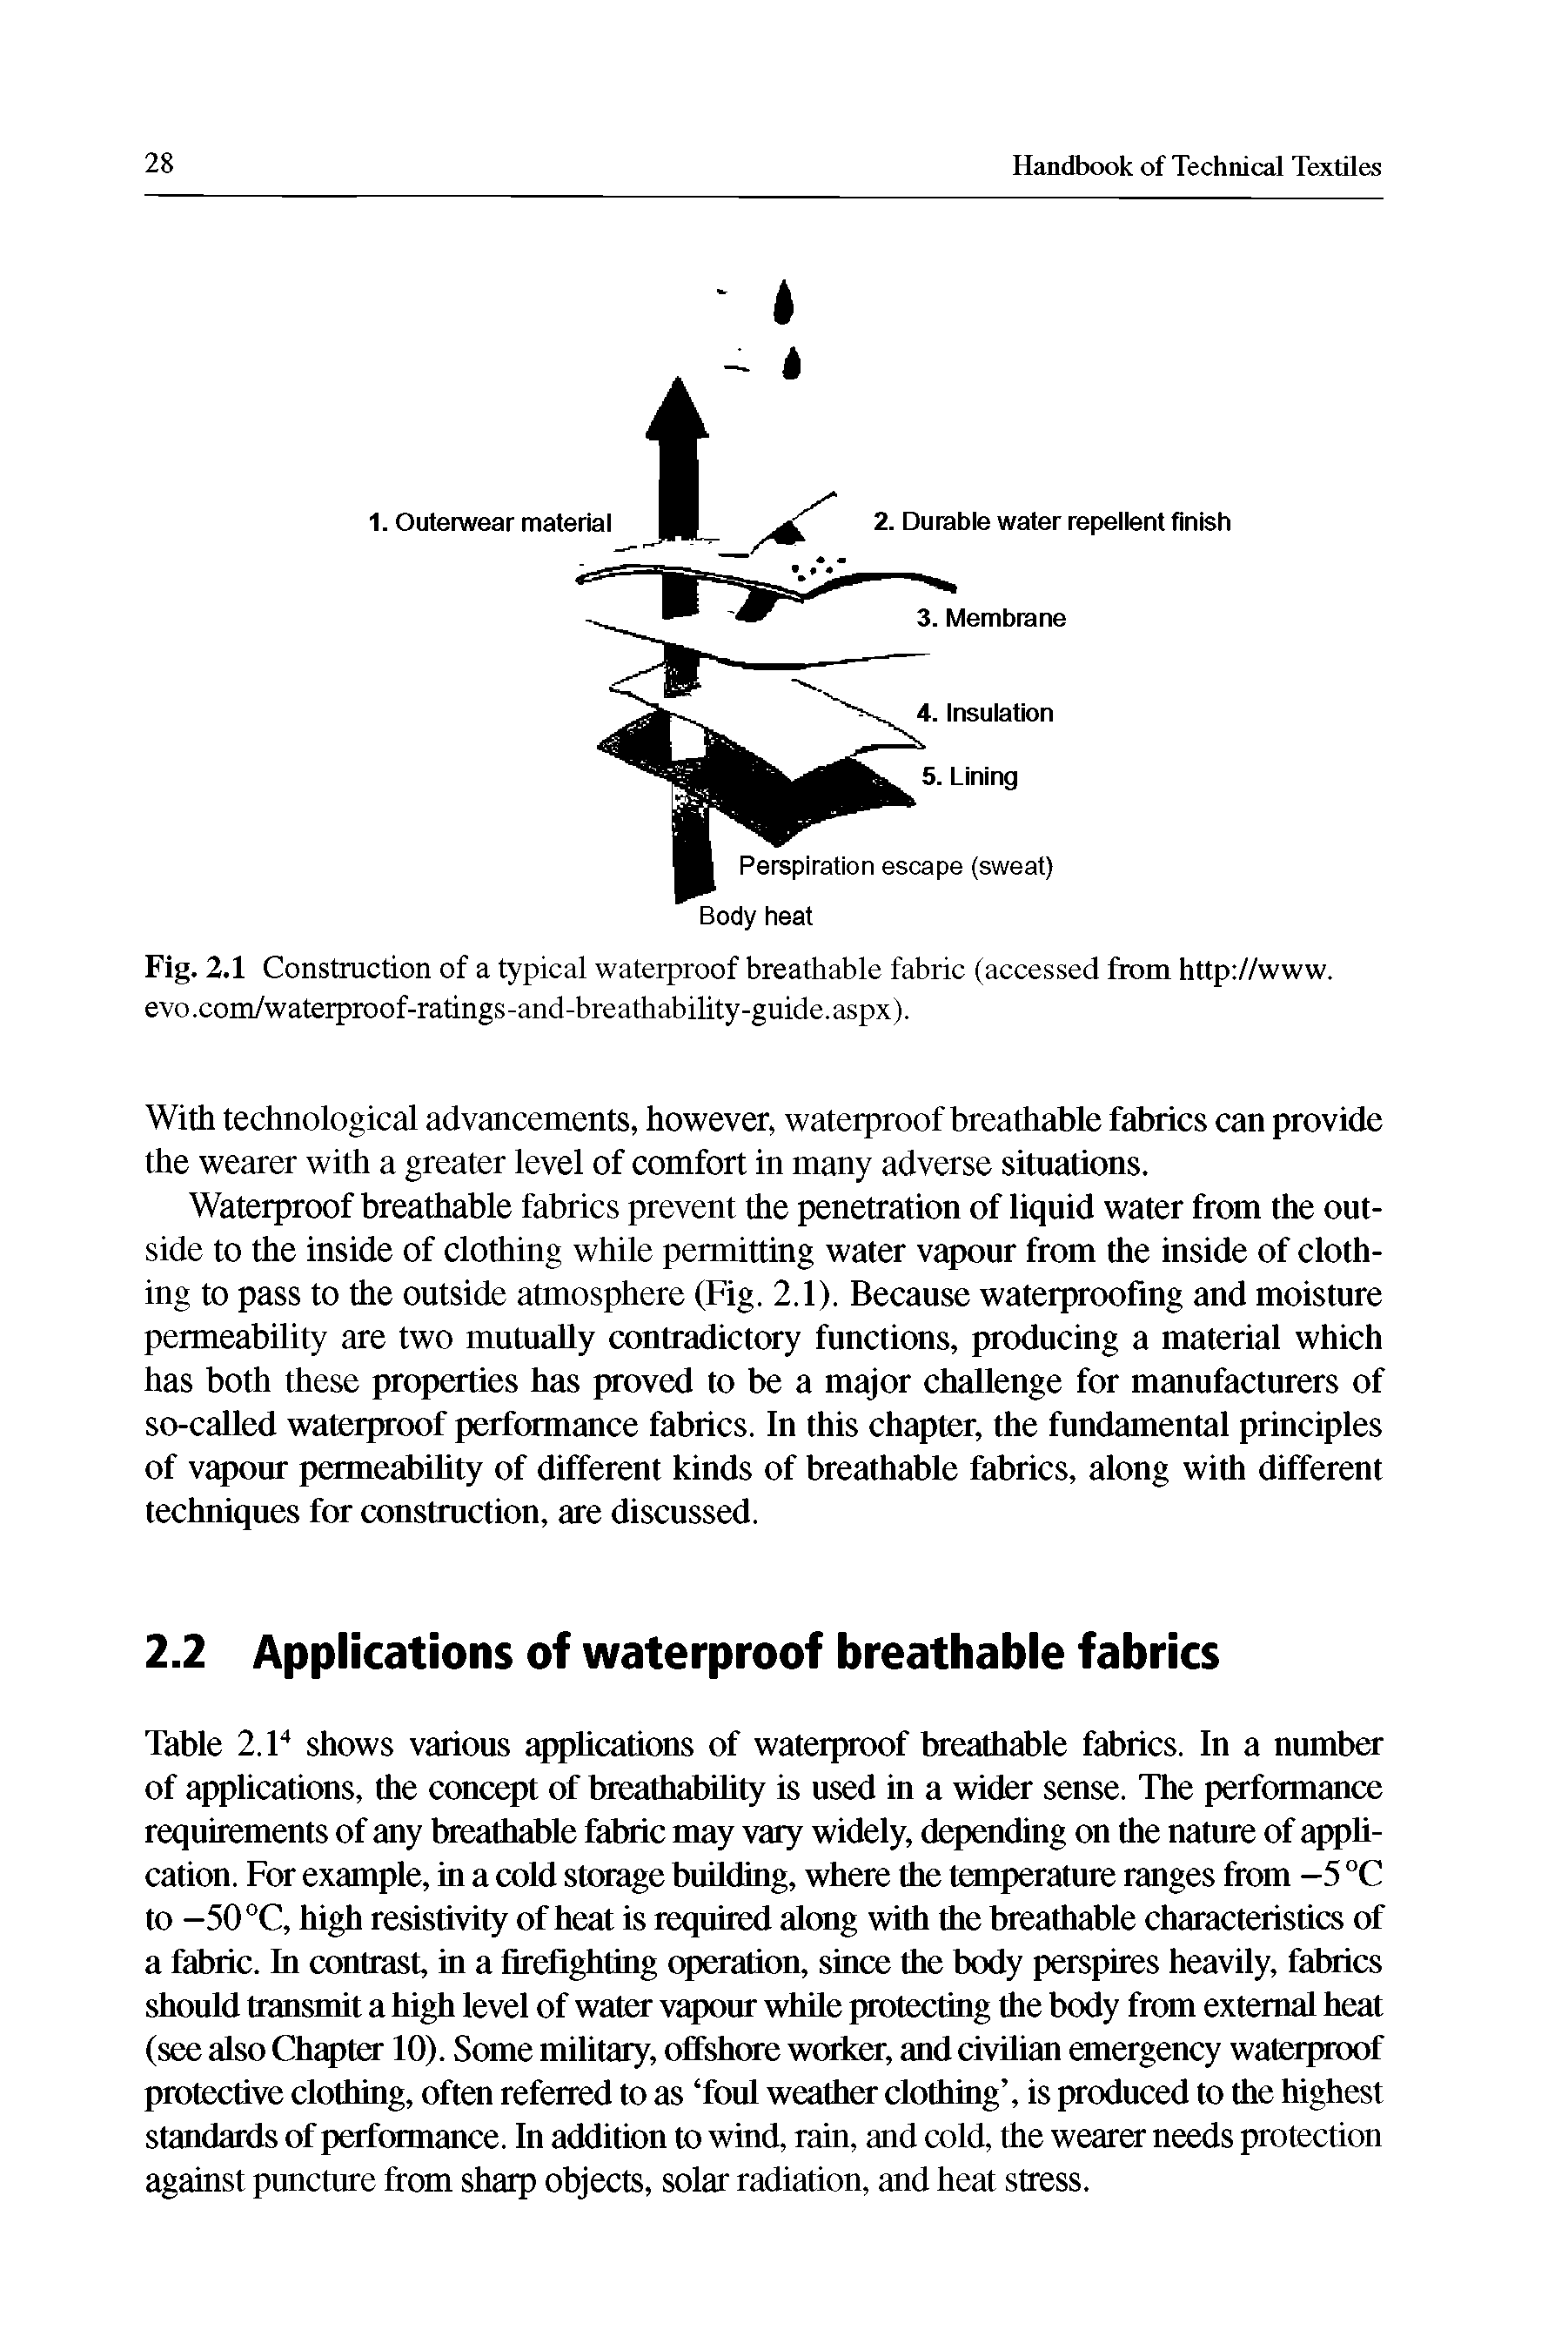 Fig. 2.1 Construction of a typical waterproof breathable fabric (accessed from http //www. evo.com/waterproof-ratings-and-breathability-guide.aspx).